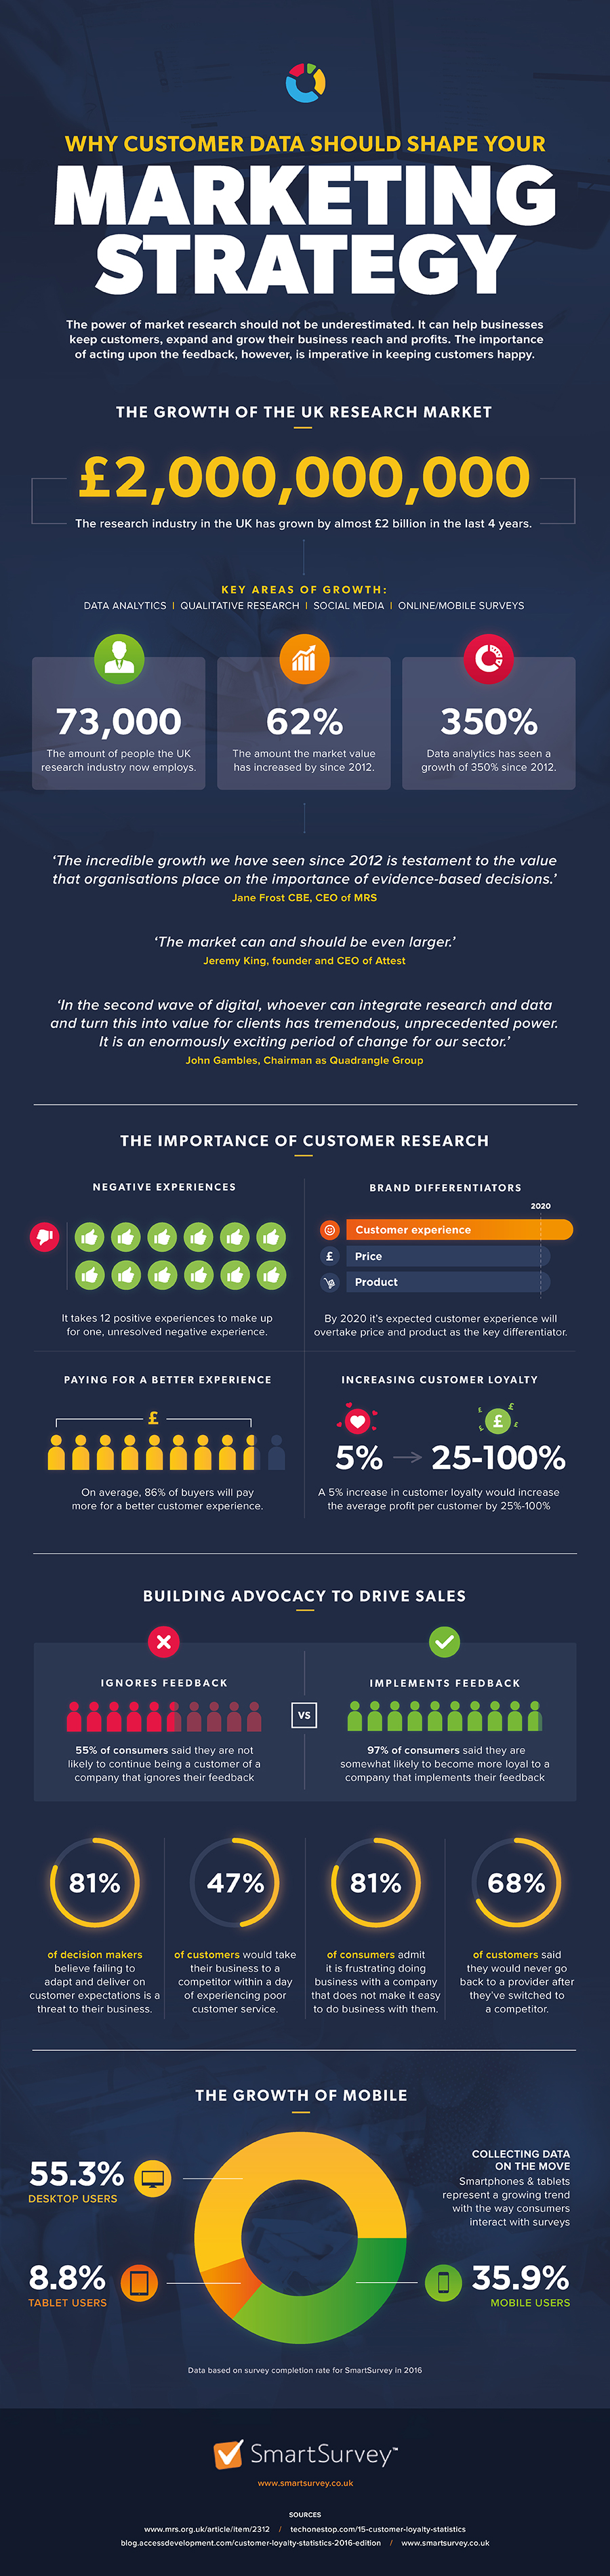 Why Customer Data Should Shape Your Marketing Strategy infographic